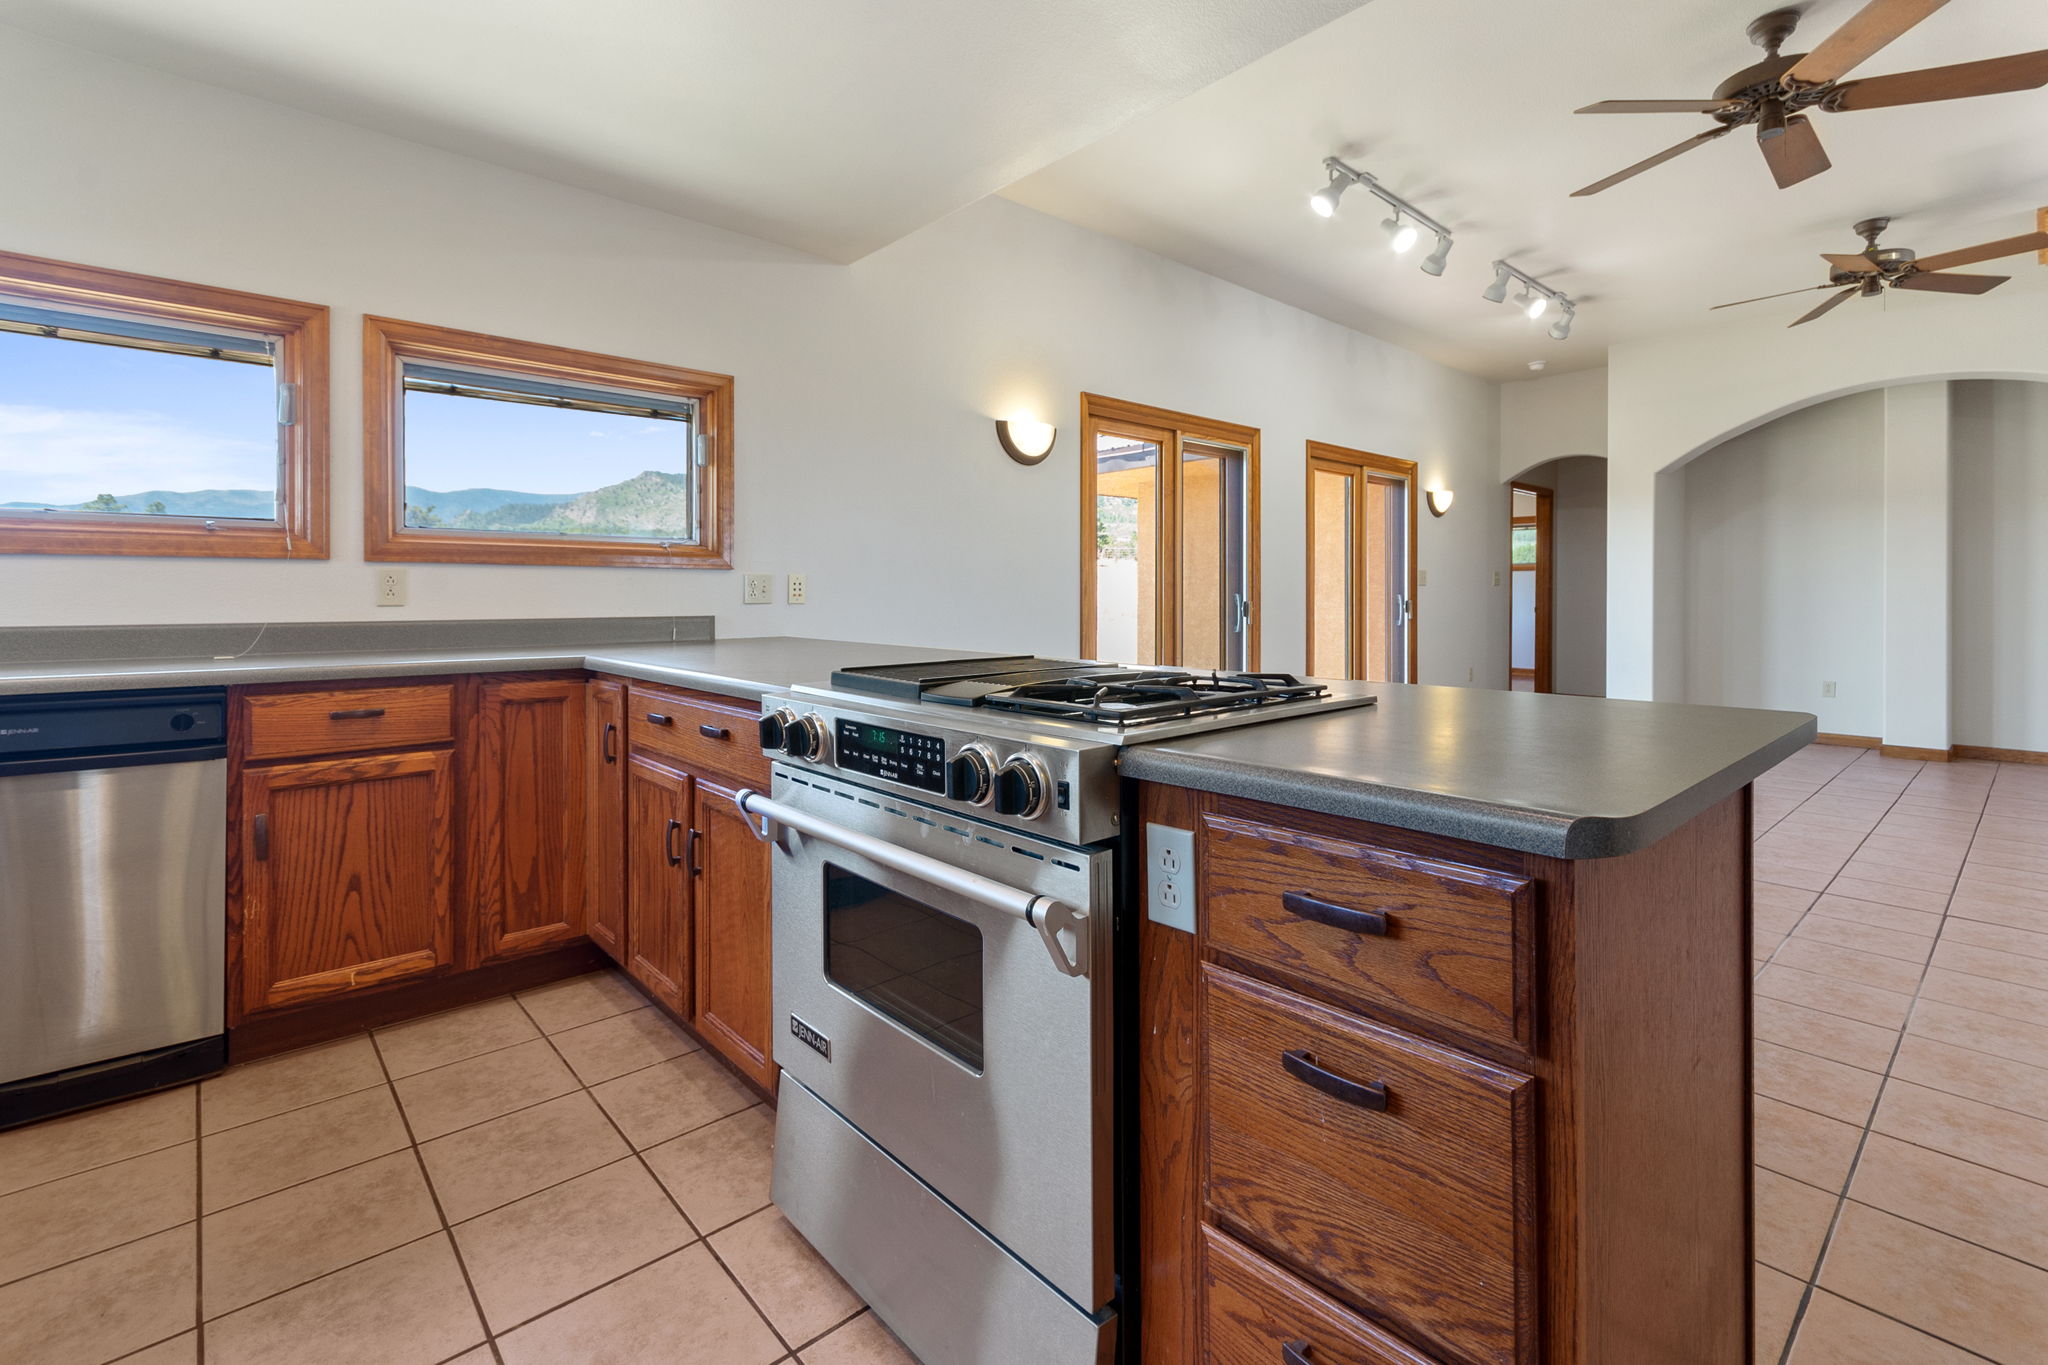  460 Co Rd 290, Florence, CO 81226, US Photo 12